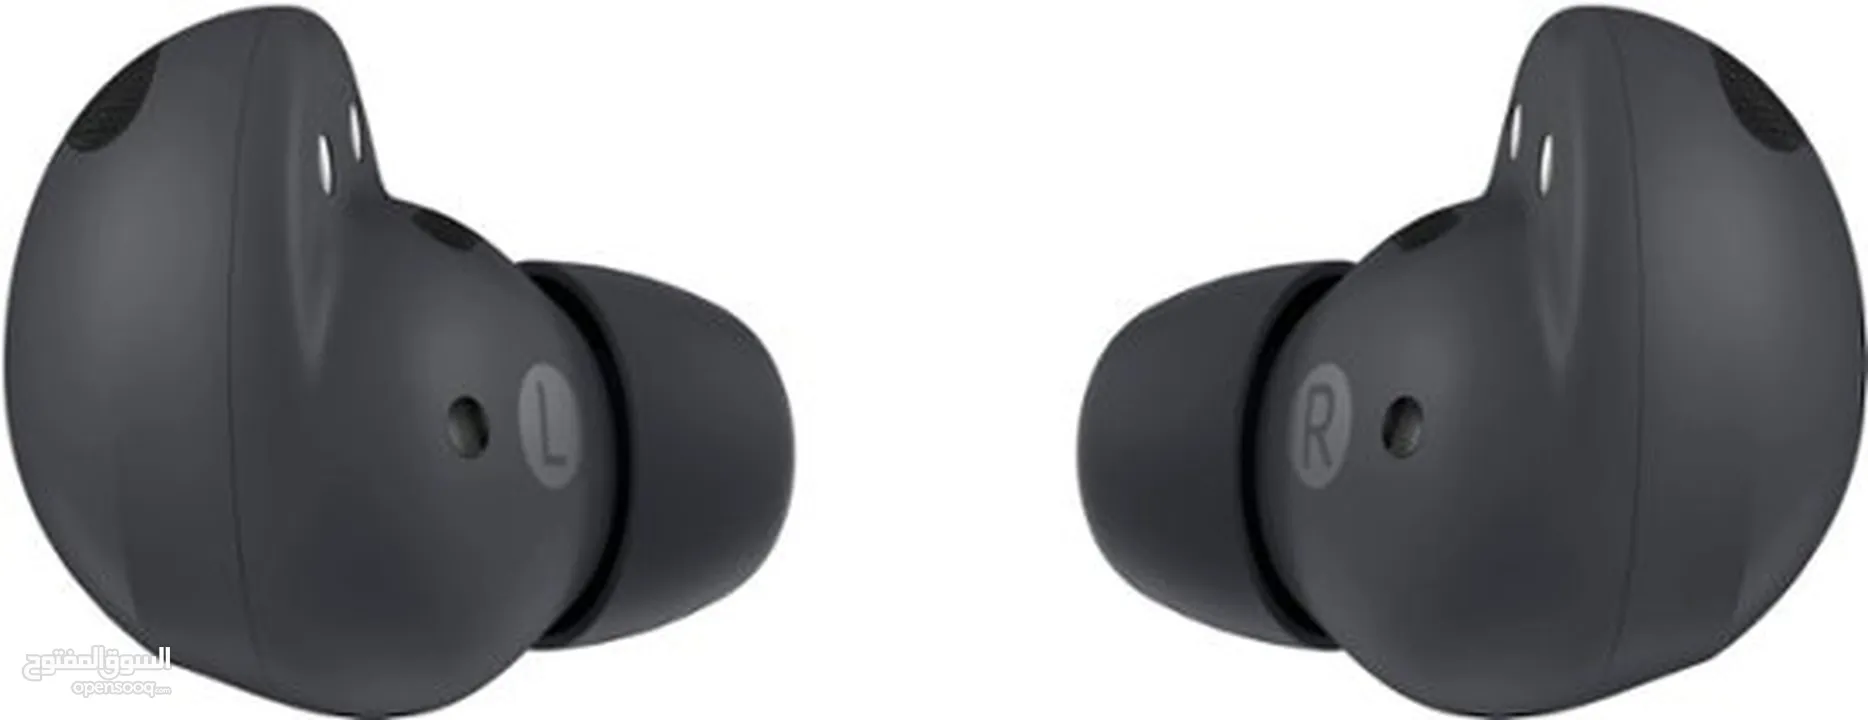 Samsung Galaxy Buds 2 Pro Best wireless earbuds for phone fans